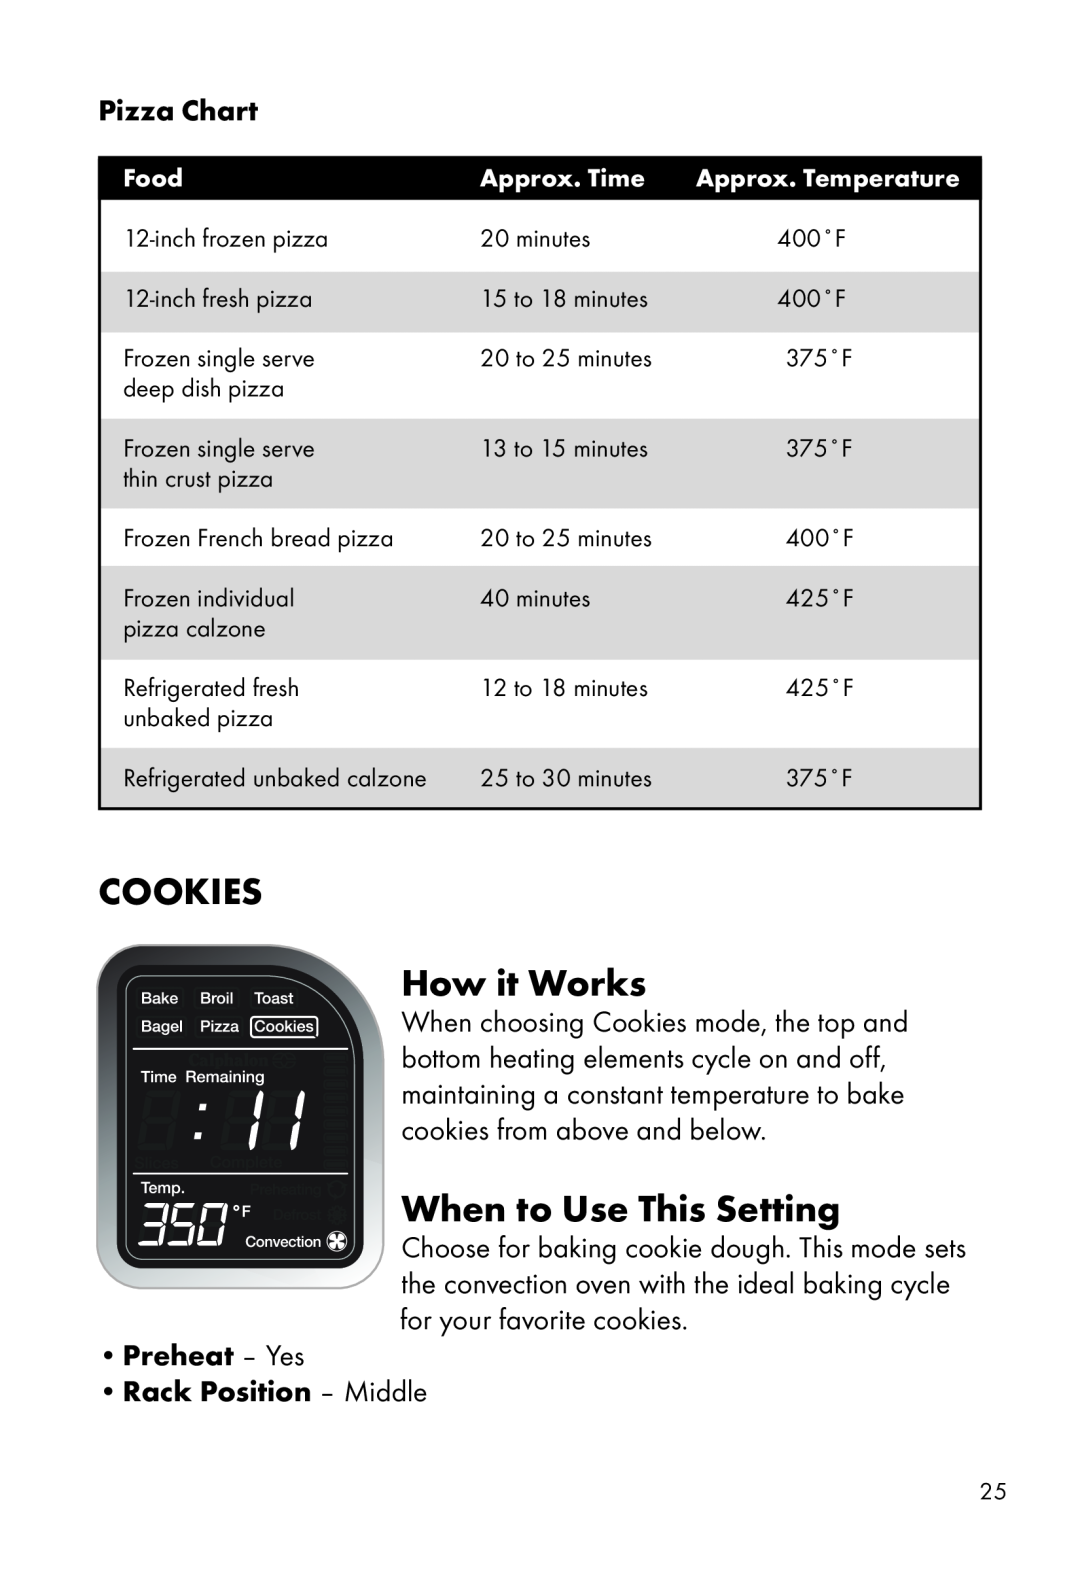 Calphalon HE700CO COOKIES How it Works, Pizza Chart, When to Use This Setting, Preheat - Yes Rack Position - Middle, Food 